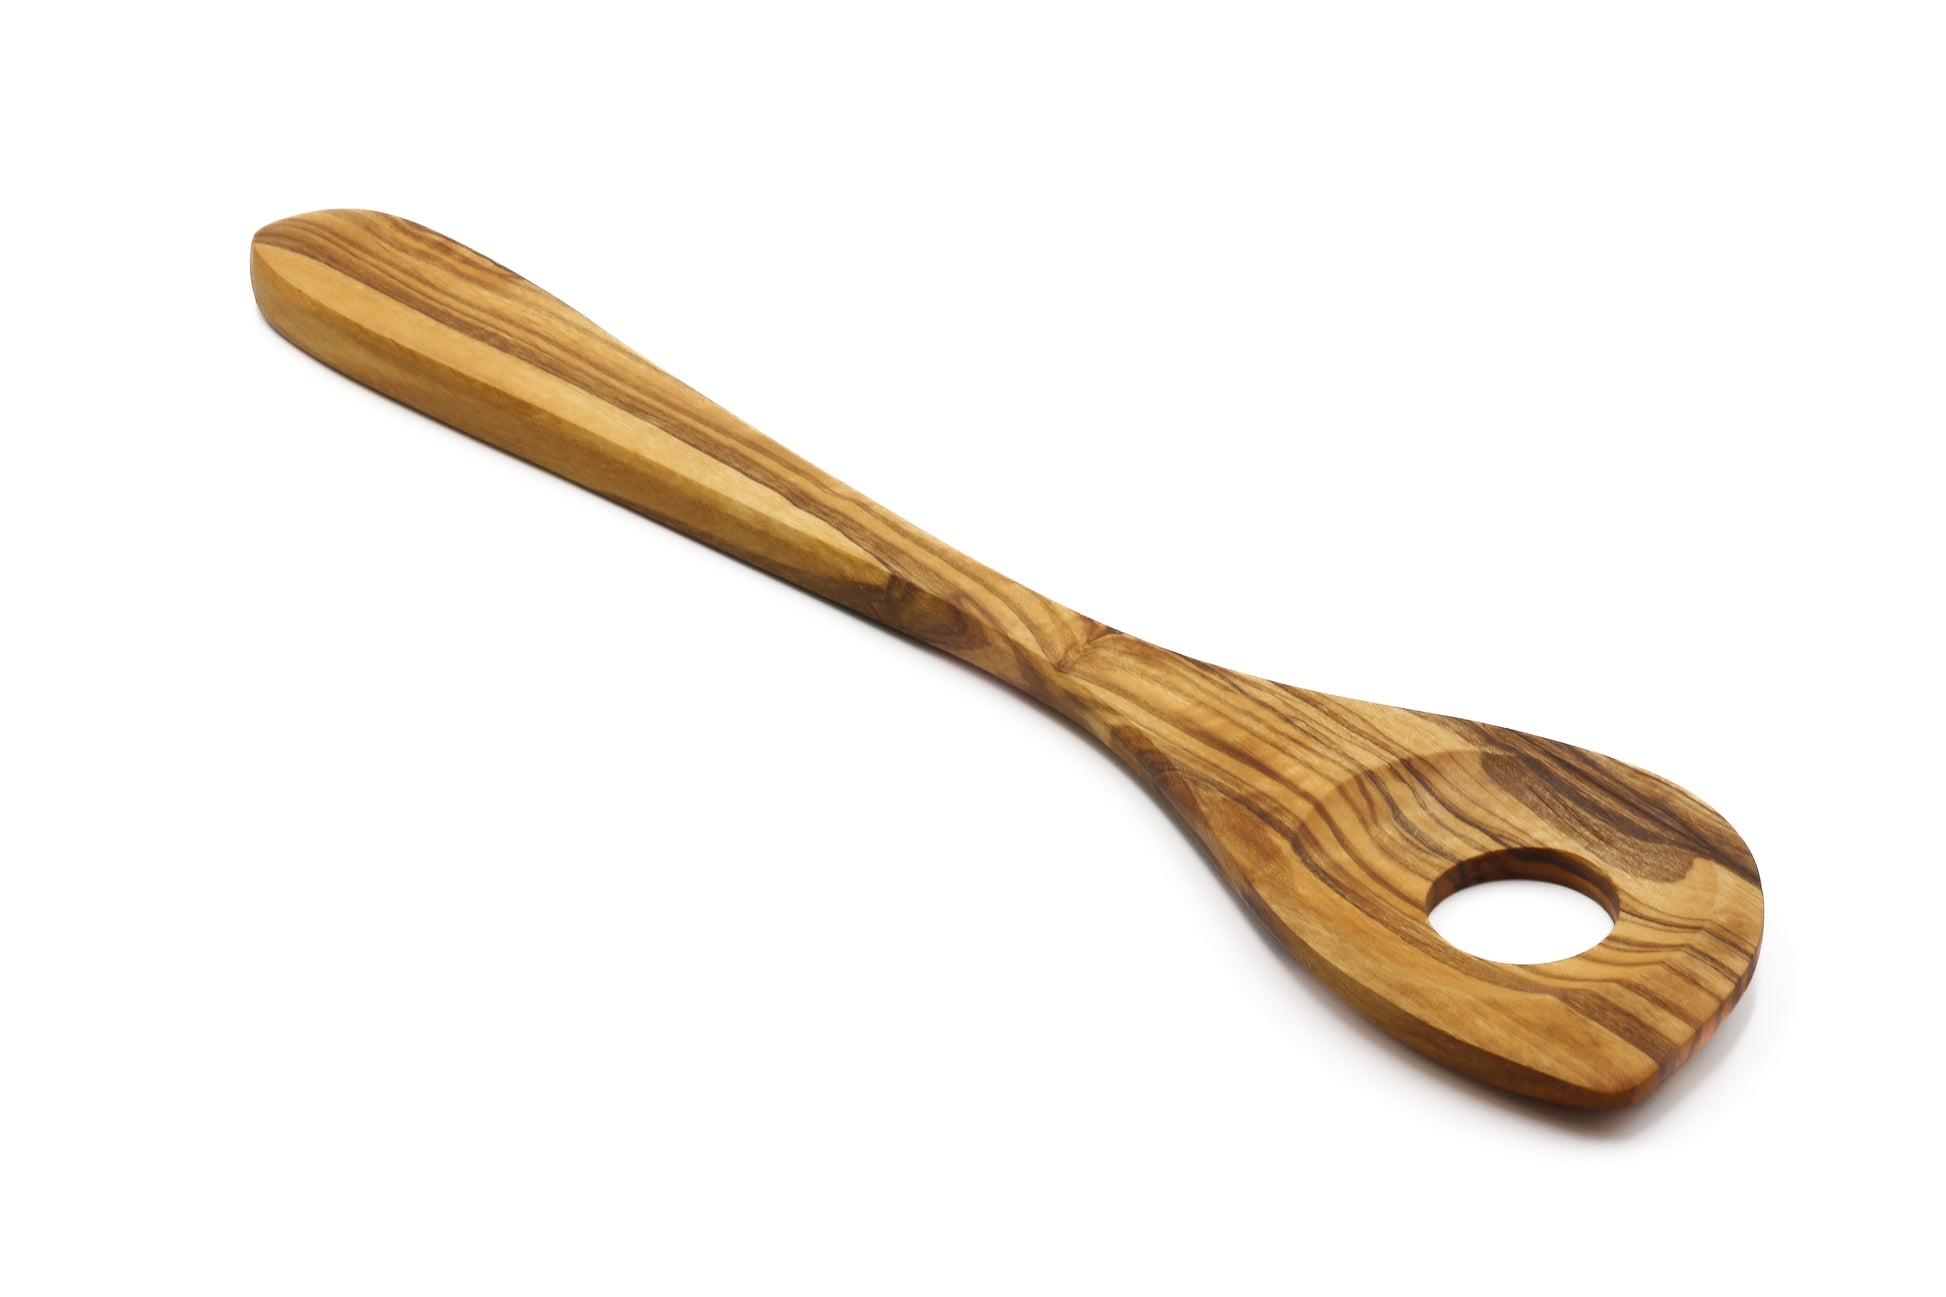 Artisan-made pointed cooking spoon in olive wood, designed with a central hole